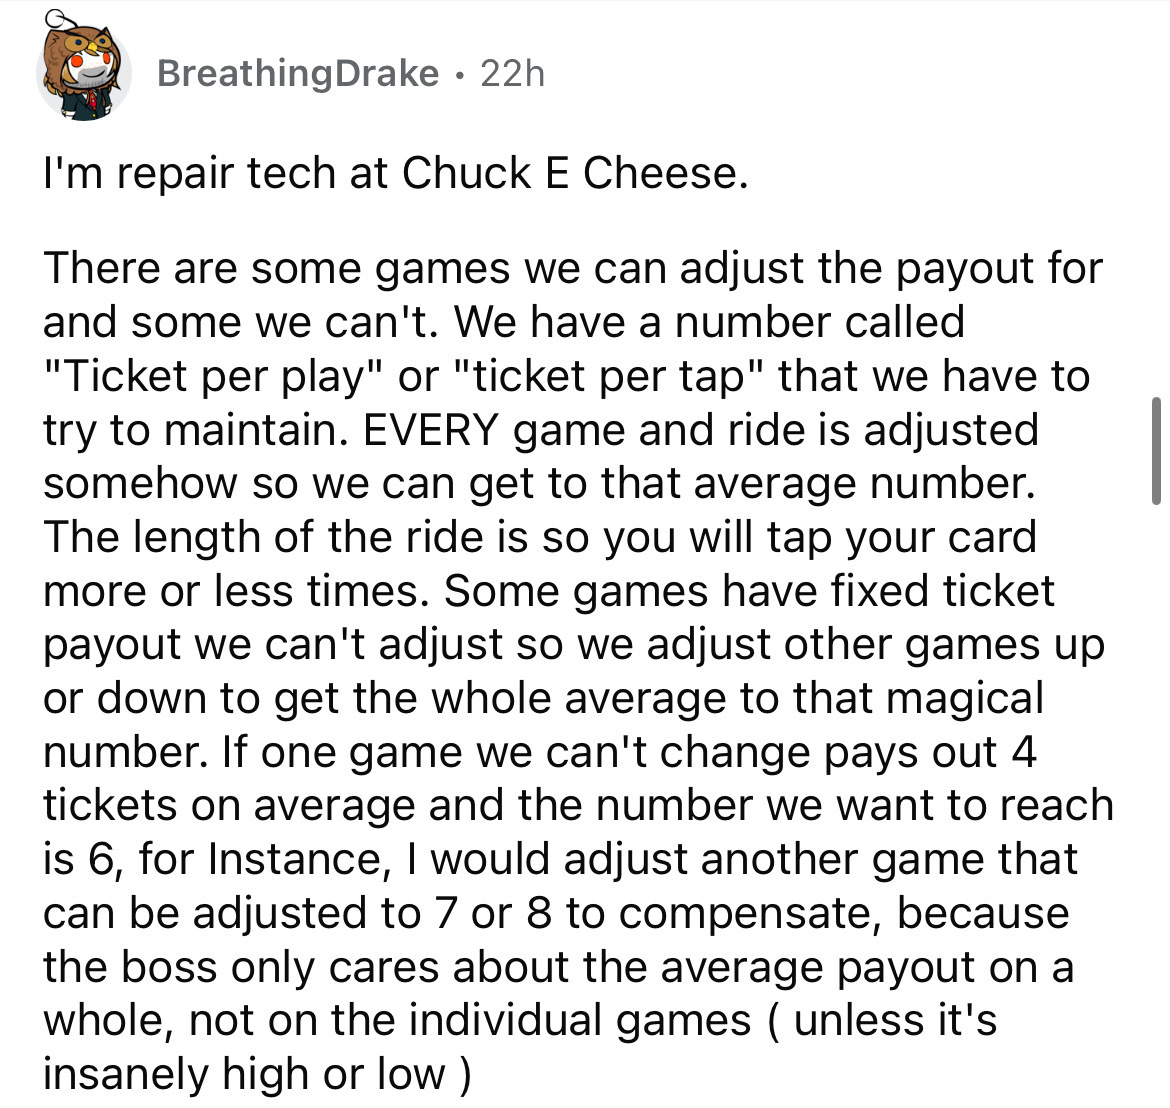 document - Breathing Drake 22h I'm repair tech at Chuck E Cheese. There are some games we can adjust the payout for and some we can't. We have a number called